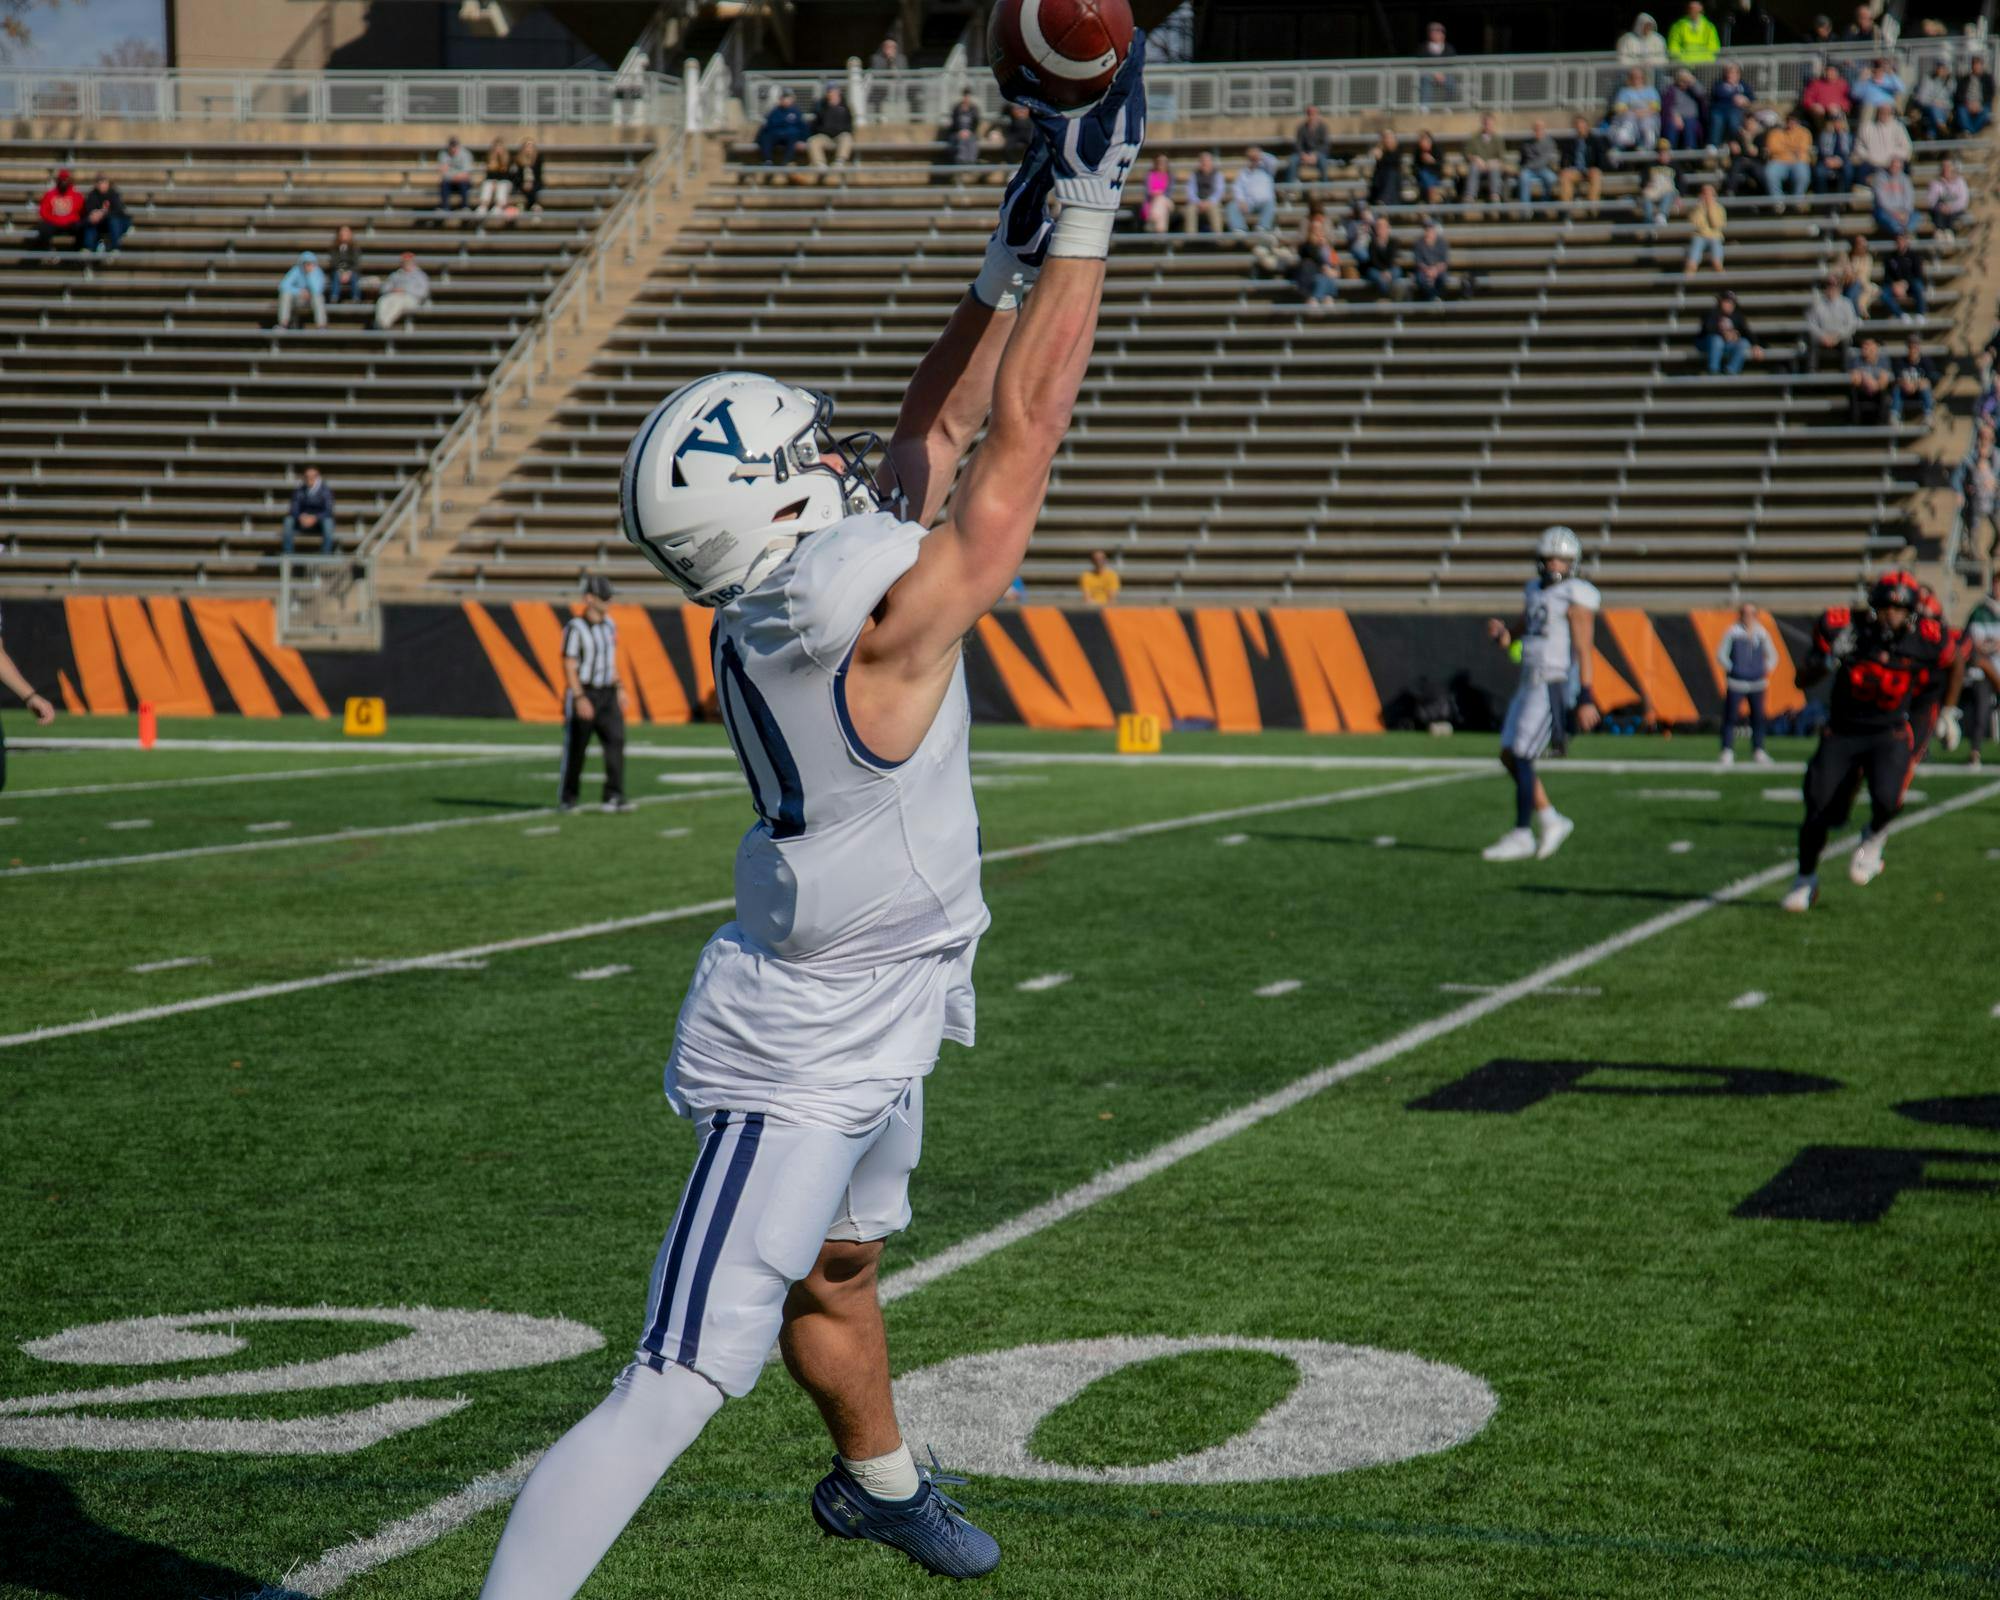 A Yale football player jumps to catch the football.